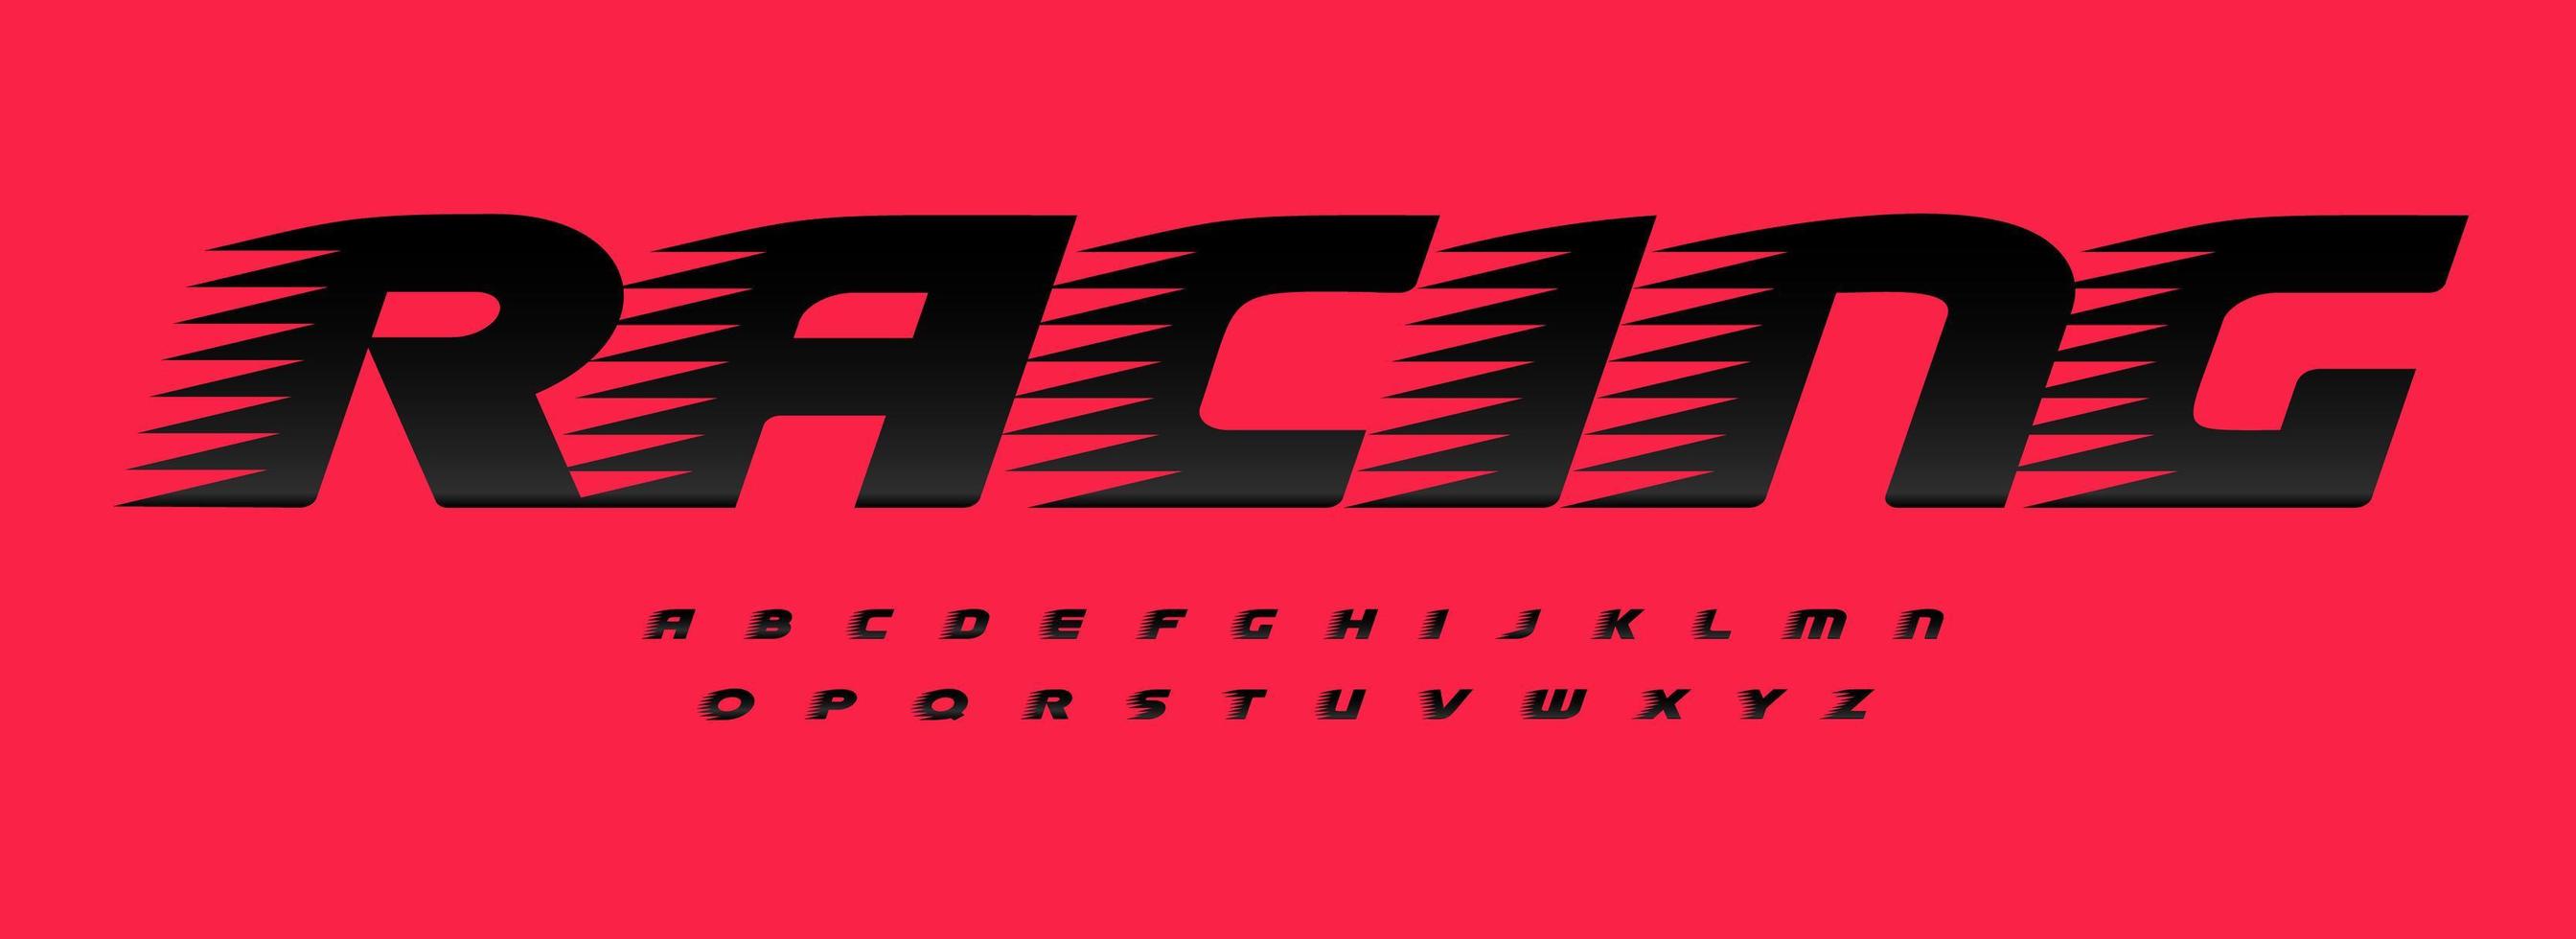 https://static.vecteezy.com/system/resources/previews/004/141/858/non_2x/racing-font-alphabet-letters-with-wind-effect-modern-sport-logo-typography-car-auto-typographic-design-italic-letter-set-for-speed-logo-race-headline-game-type-isolated-typeset-vector.jpg